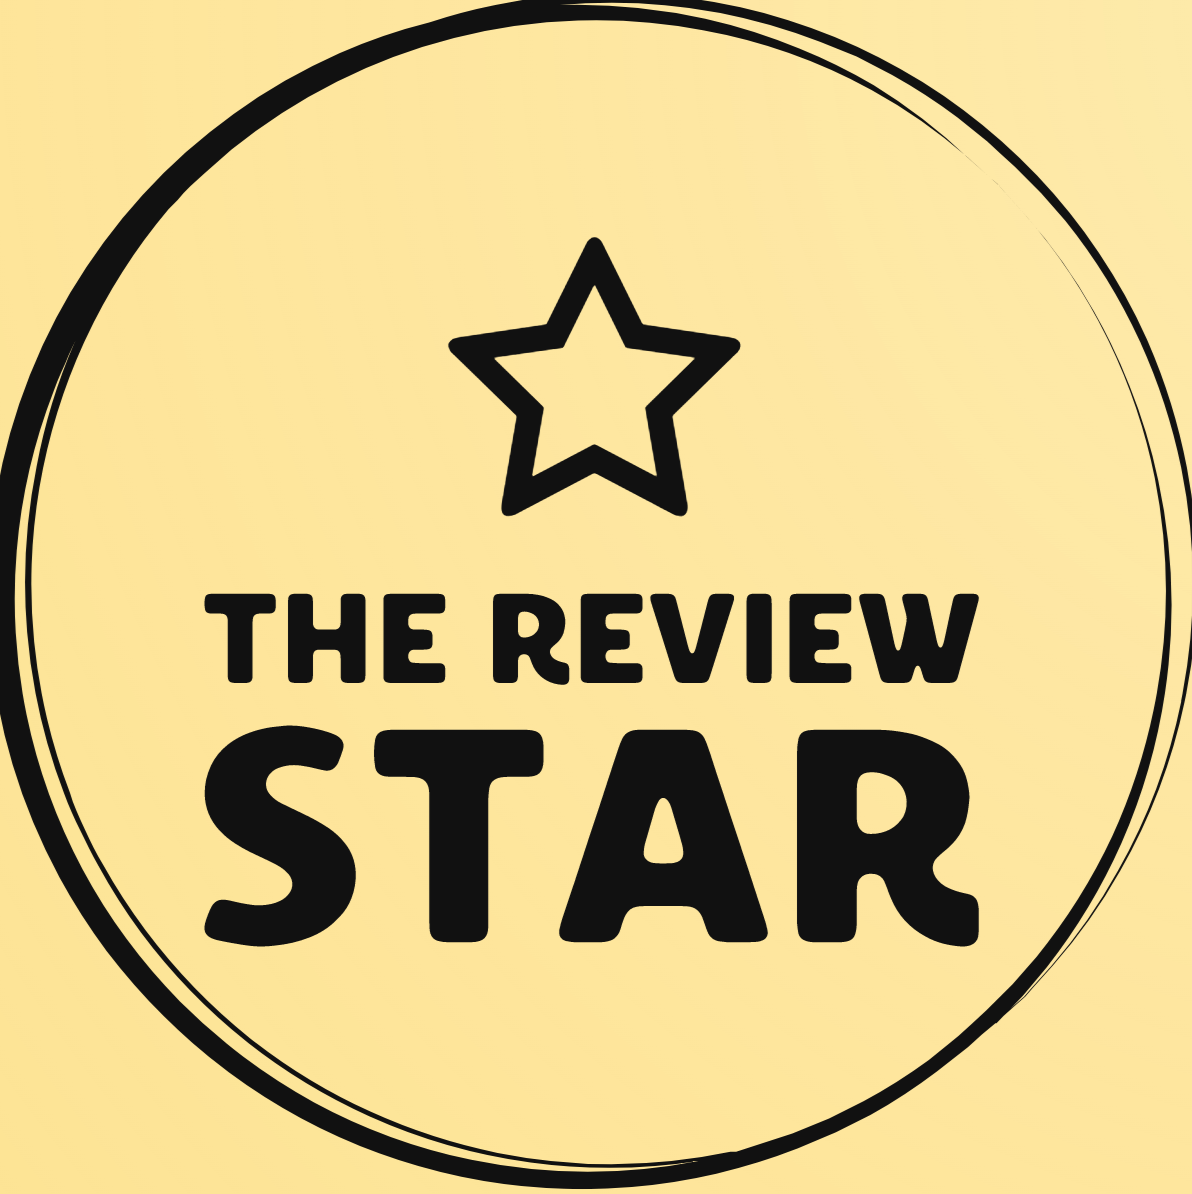 The Review Star